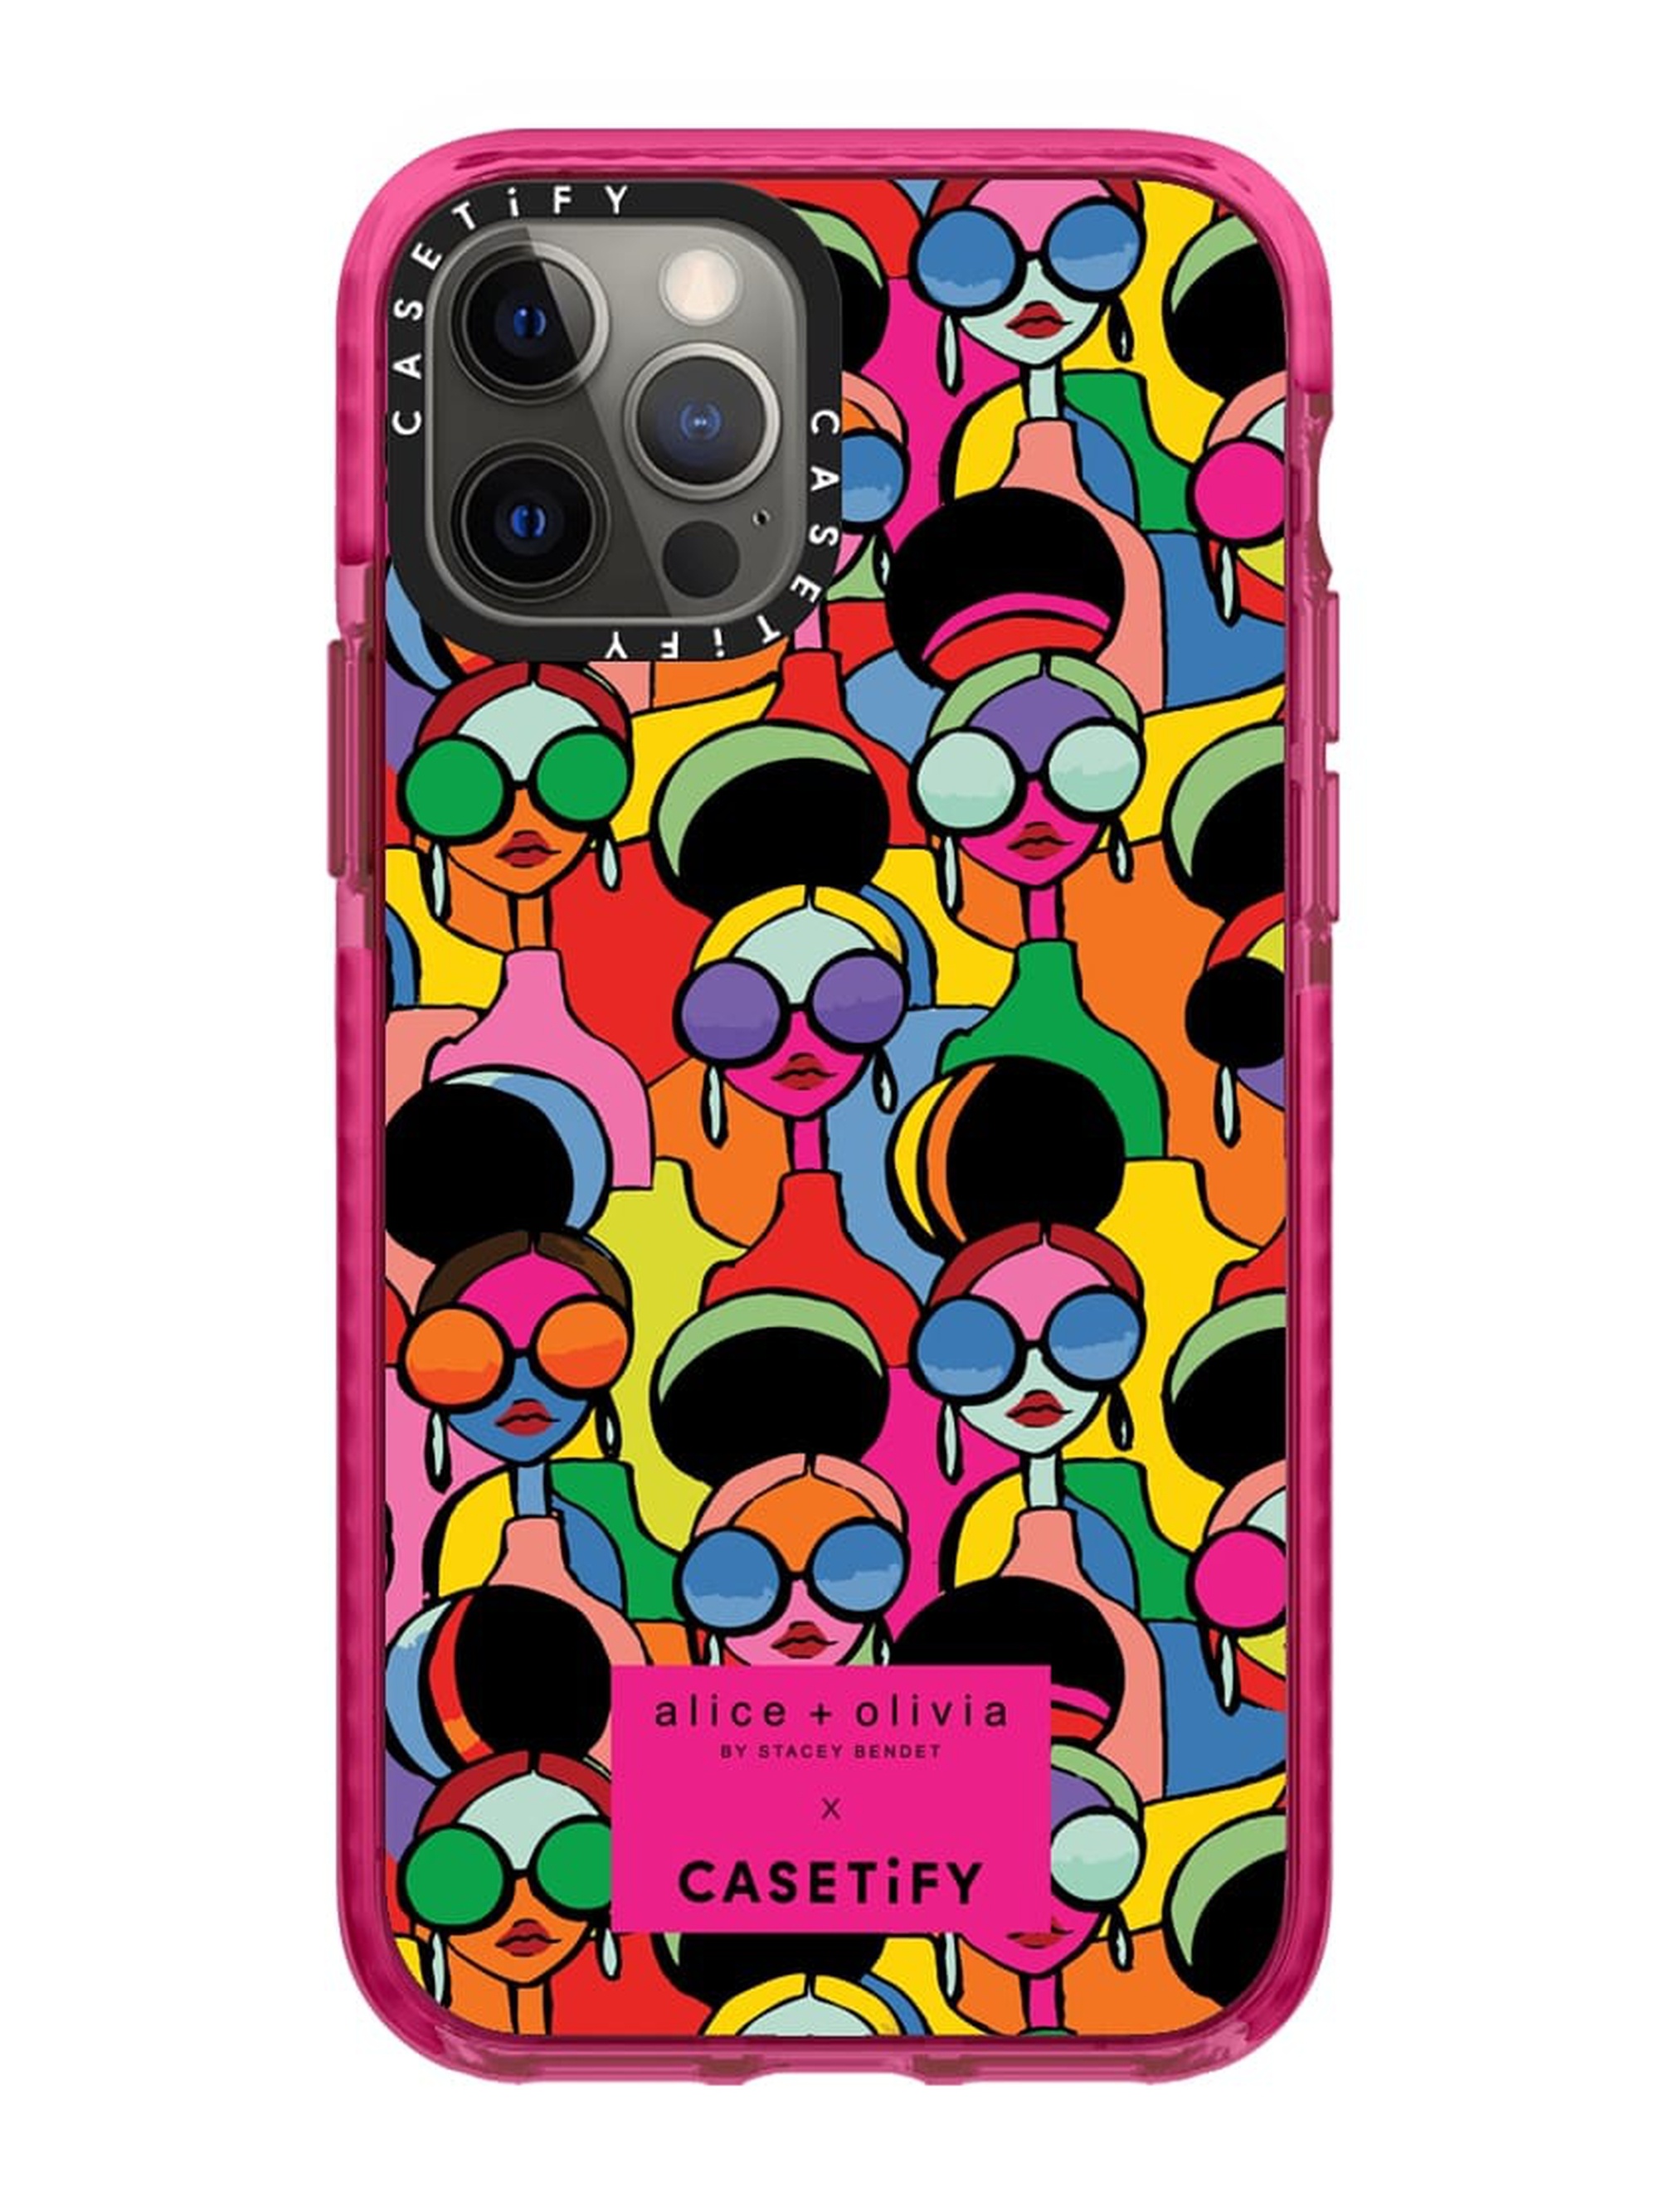 A+O X CASETIFY IPHONE 12 PRO CASE - 1